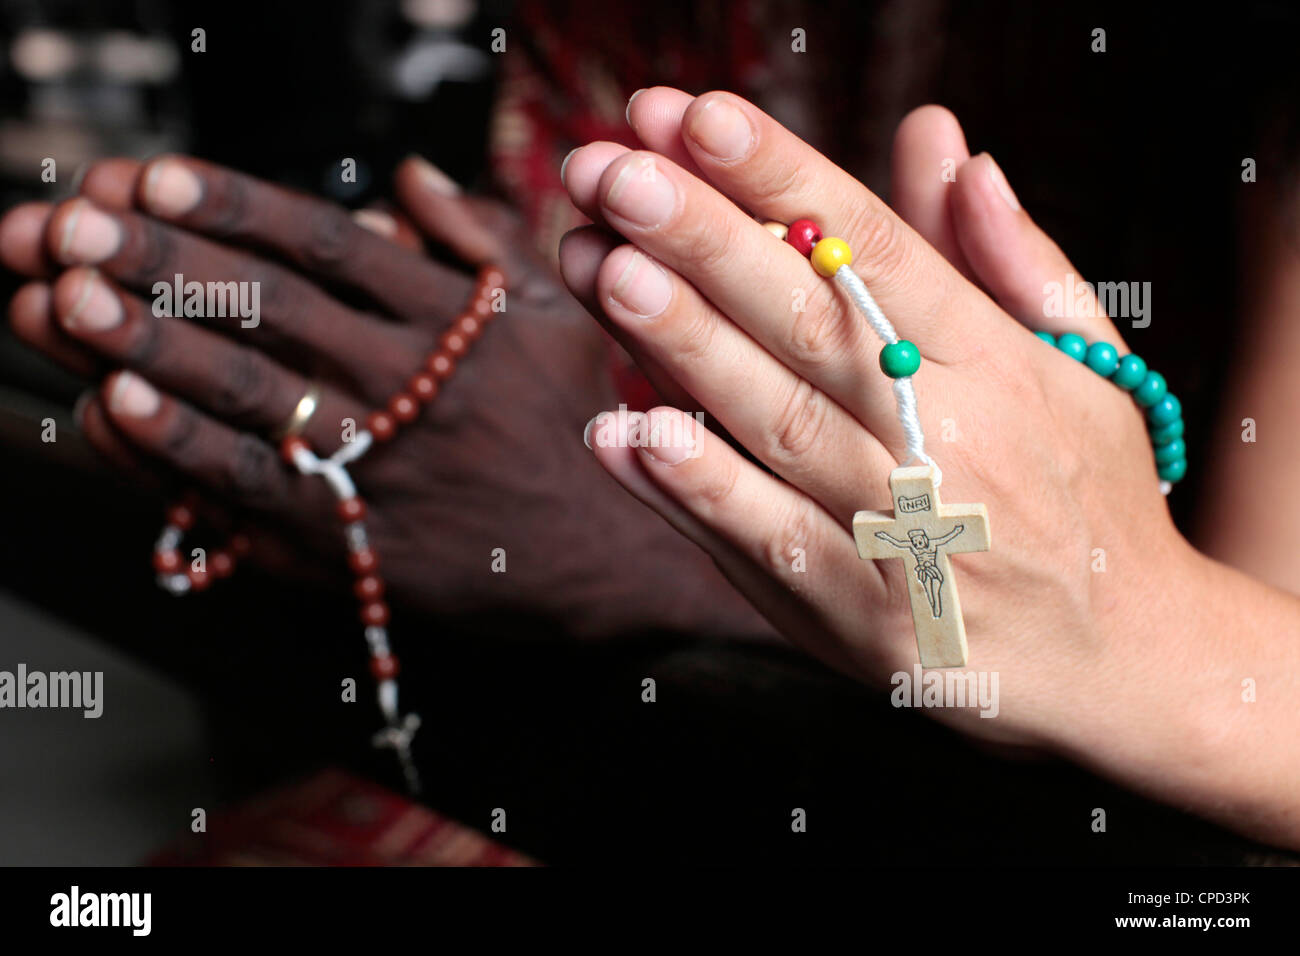 Man and woman praying together with rosaries in a church, Cotonou, Benin, West Africa, Africa Stock Photo